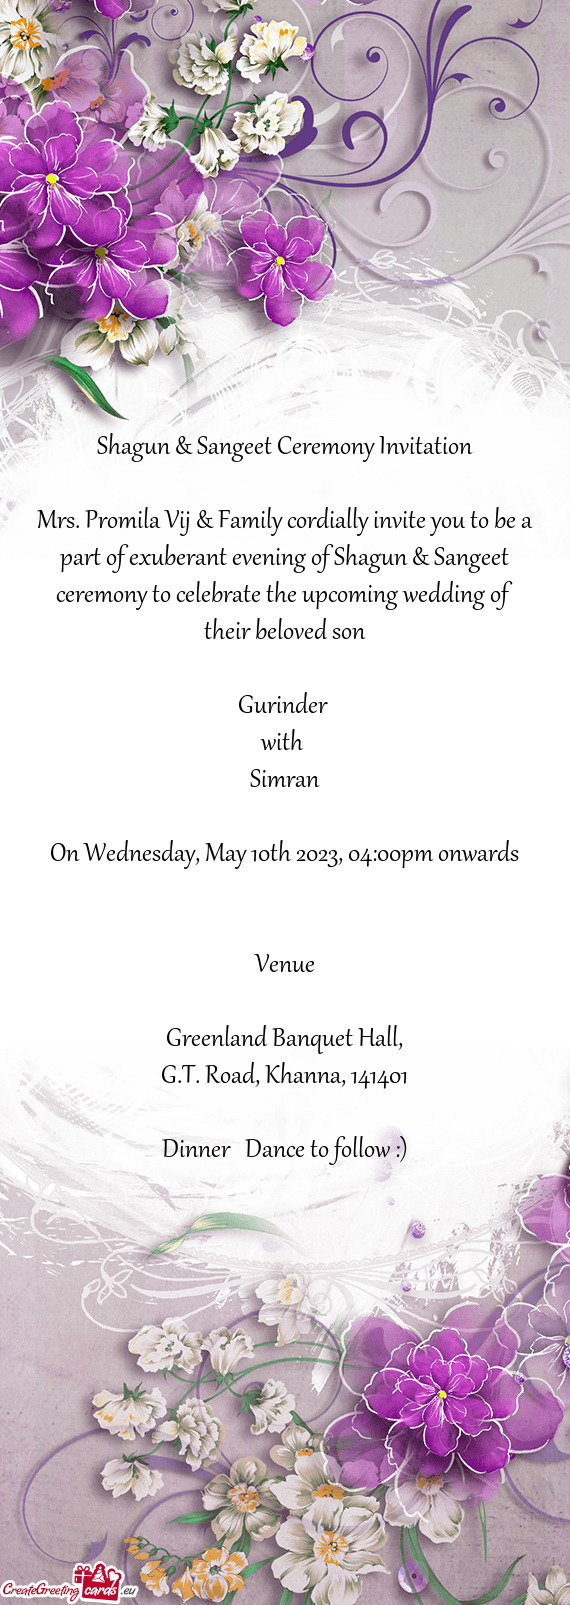 Mrs. Promila Vij & Family cordially invite you to be a part of exuberant evening of Shagun & Sangeet